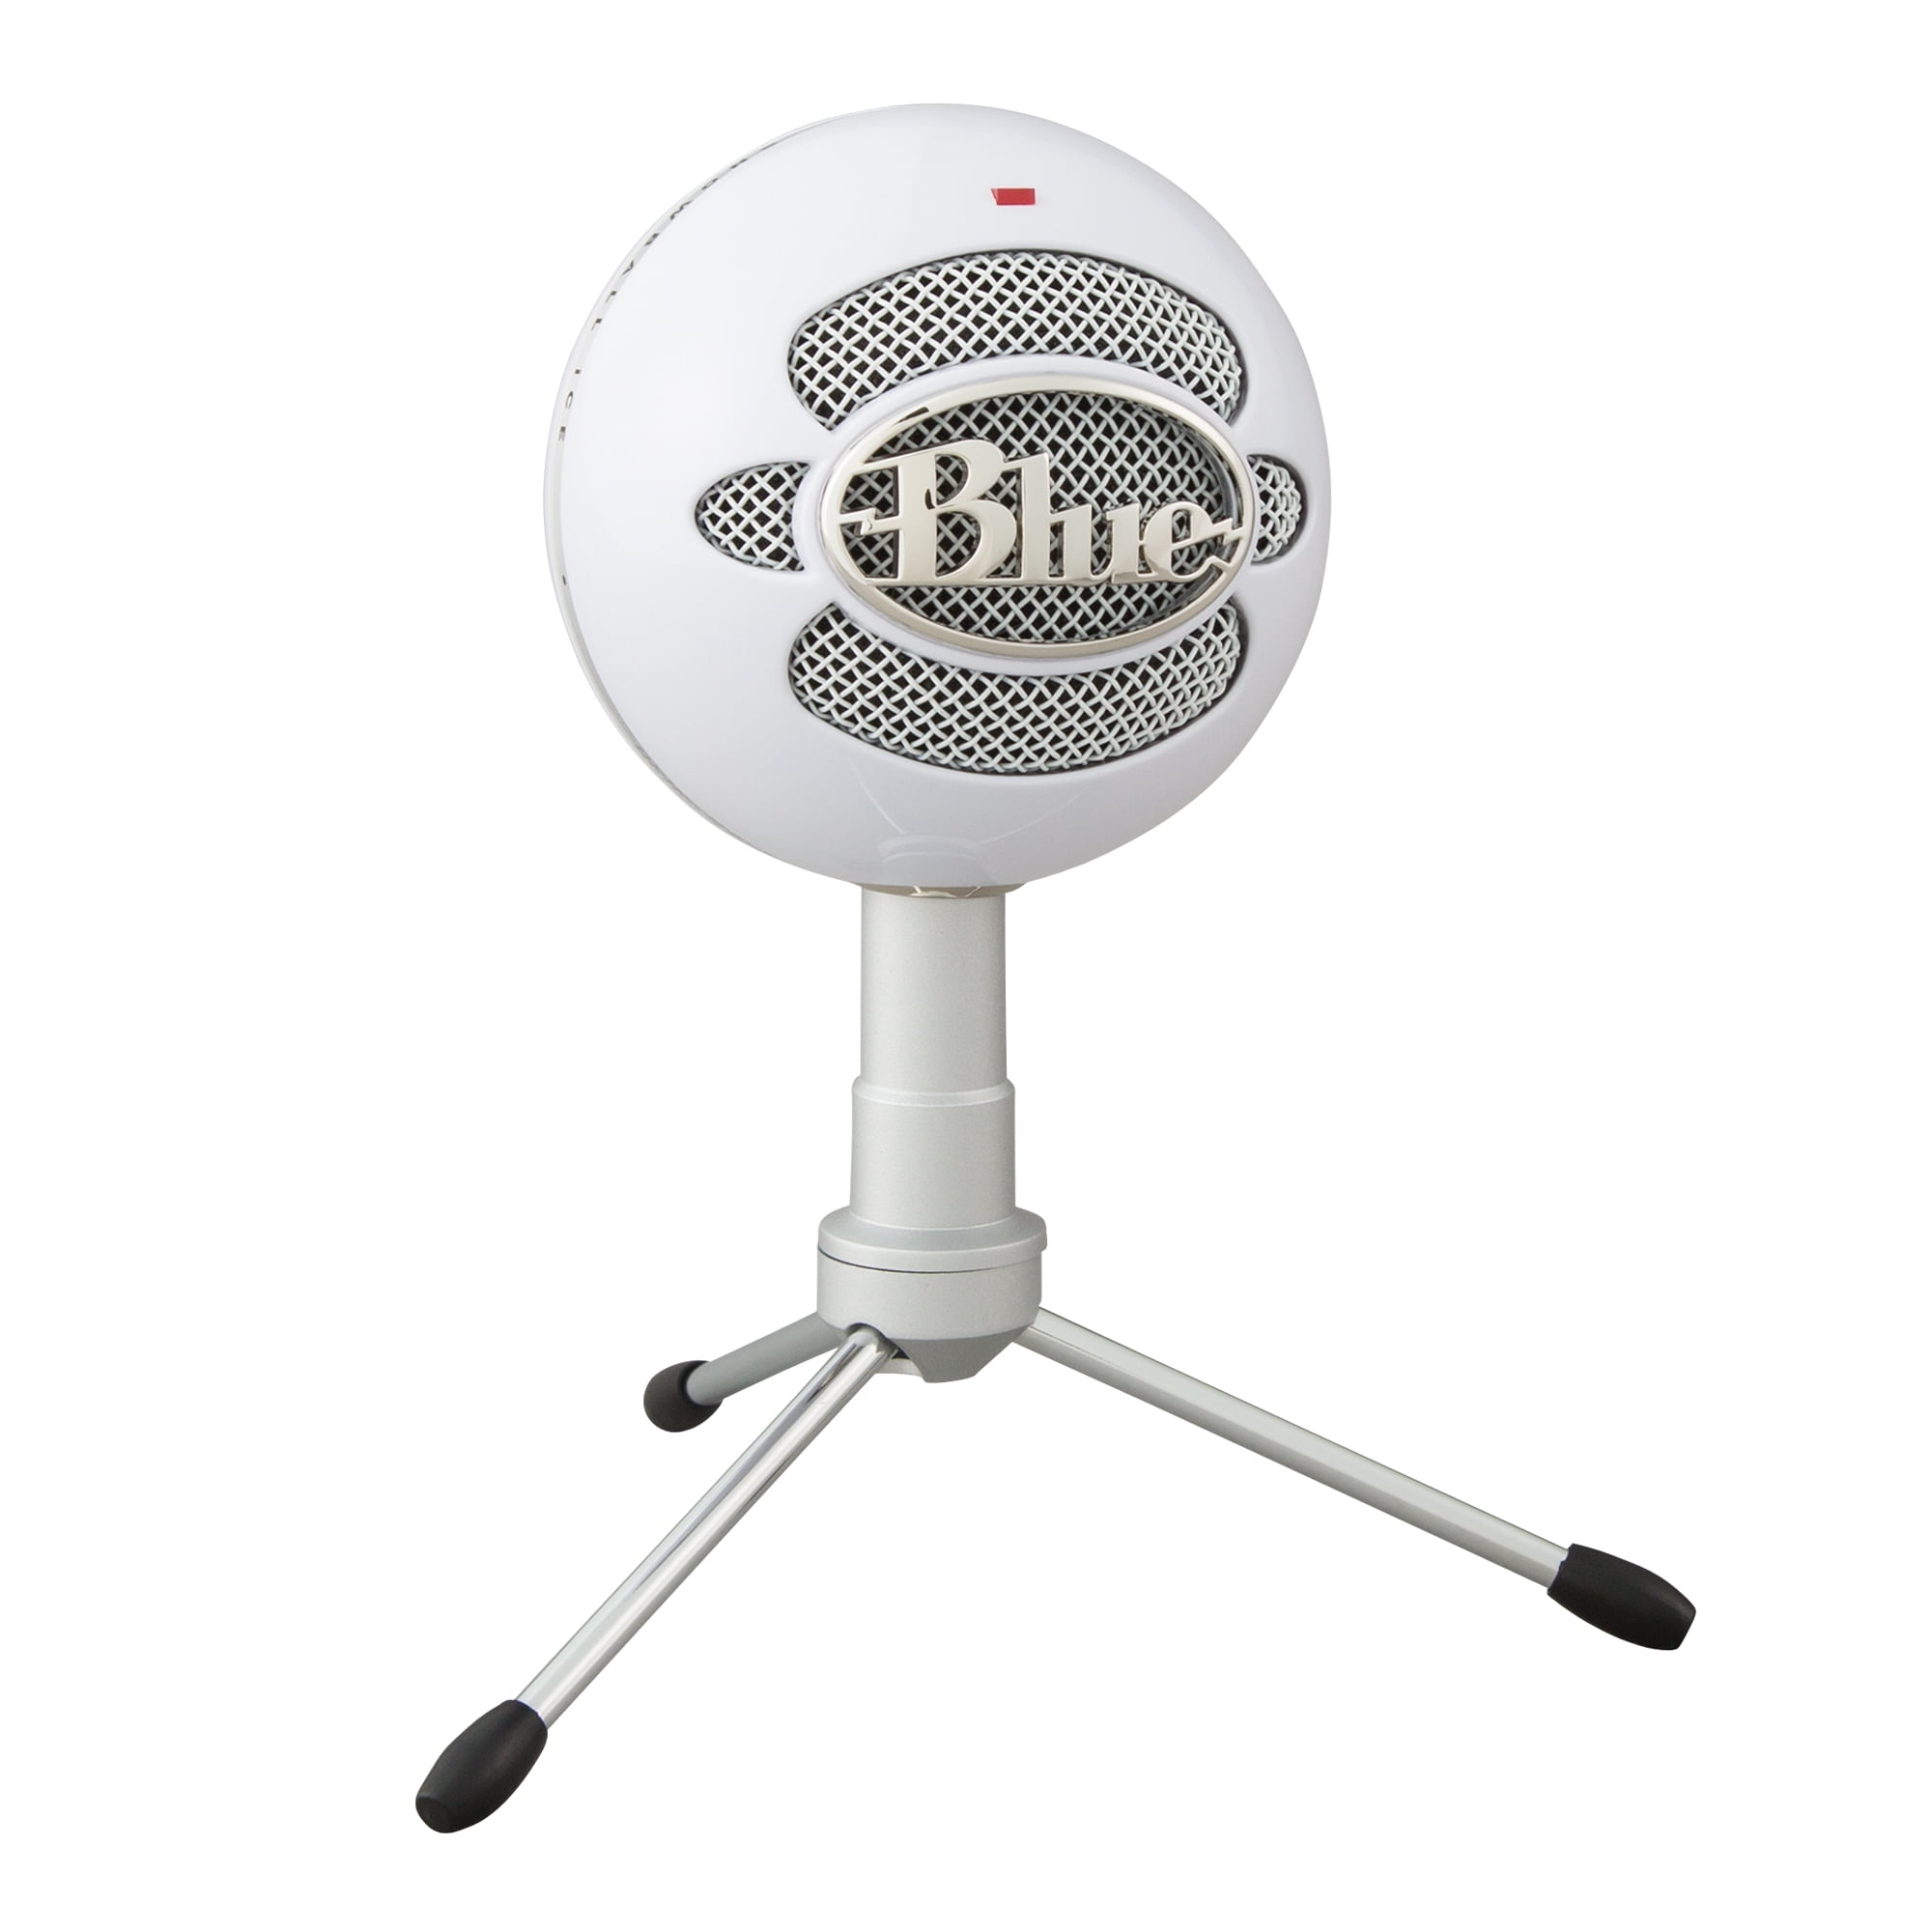 Blue Snowball iCE Plug 'n Play USB Microphone for Streaming, Podcasting, Gaming on PC and Mac, with Cardioid Condenser Capsule, Adjustable Desktop Stand and USB cable, White - Walmart.com